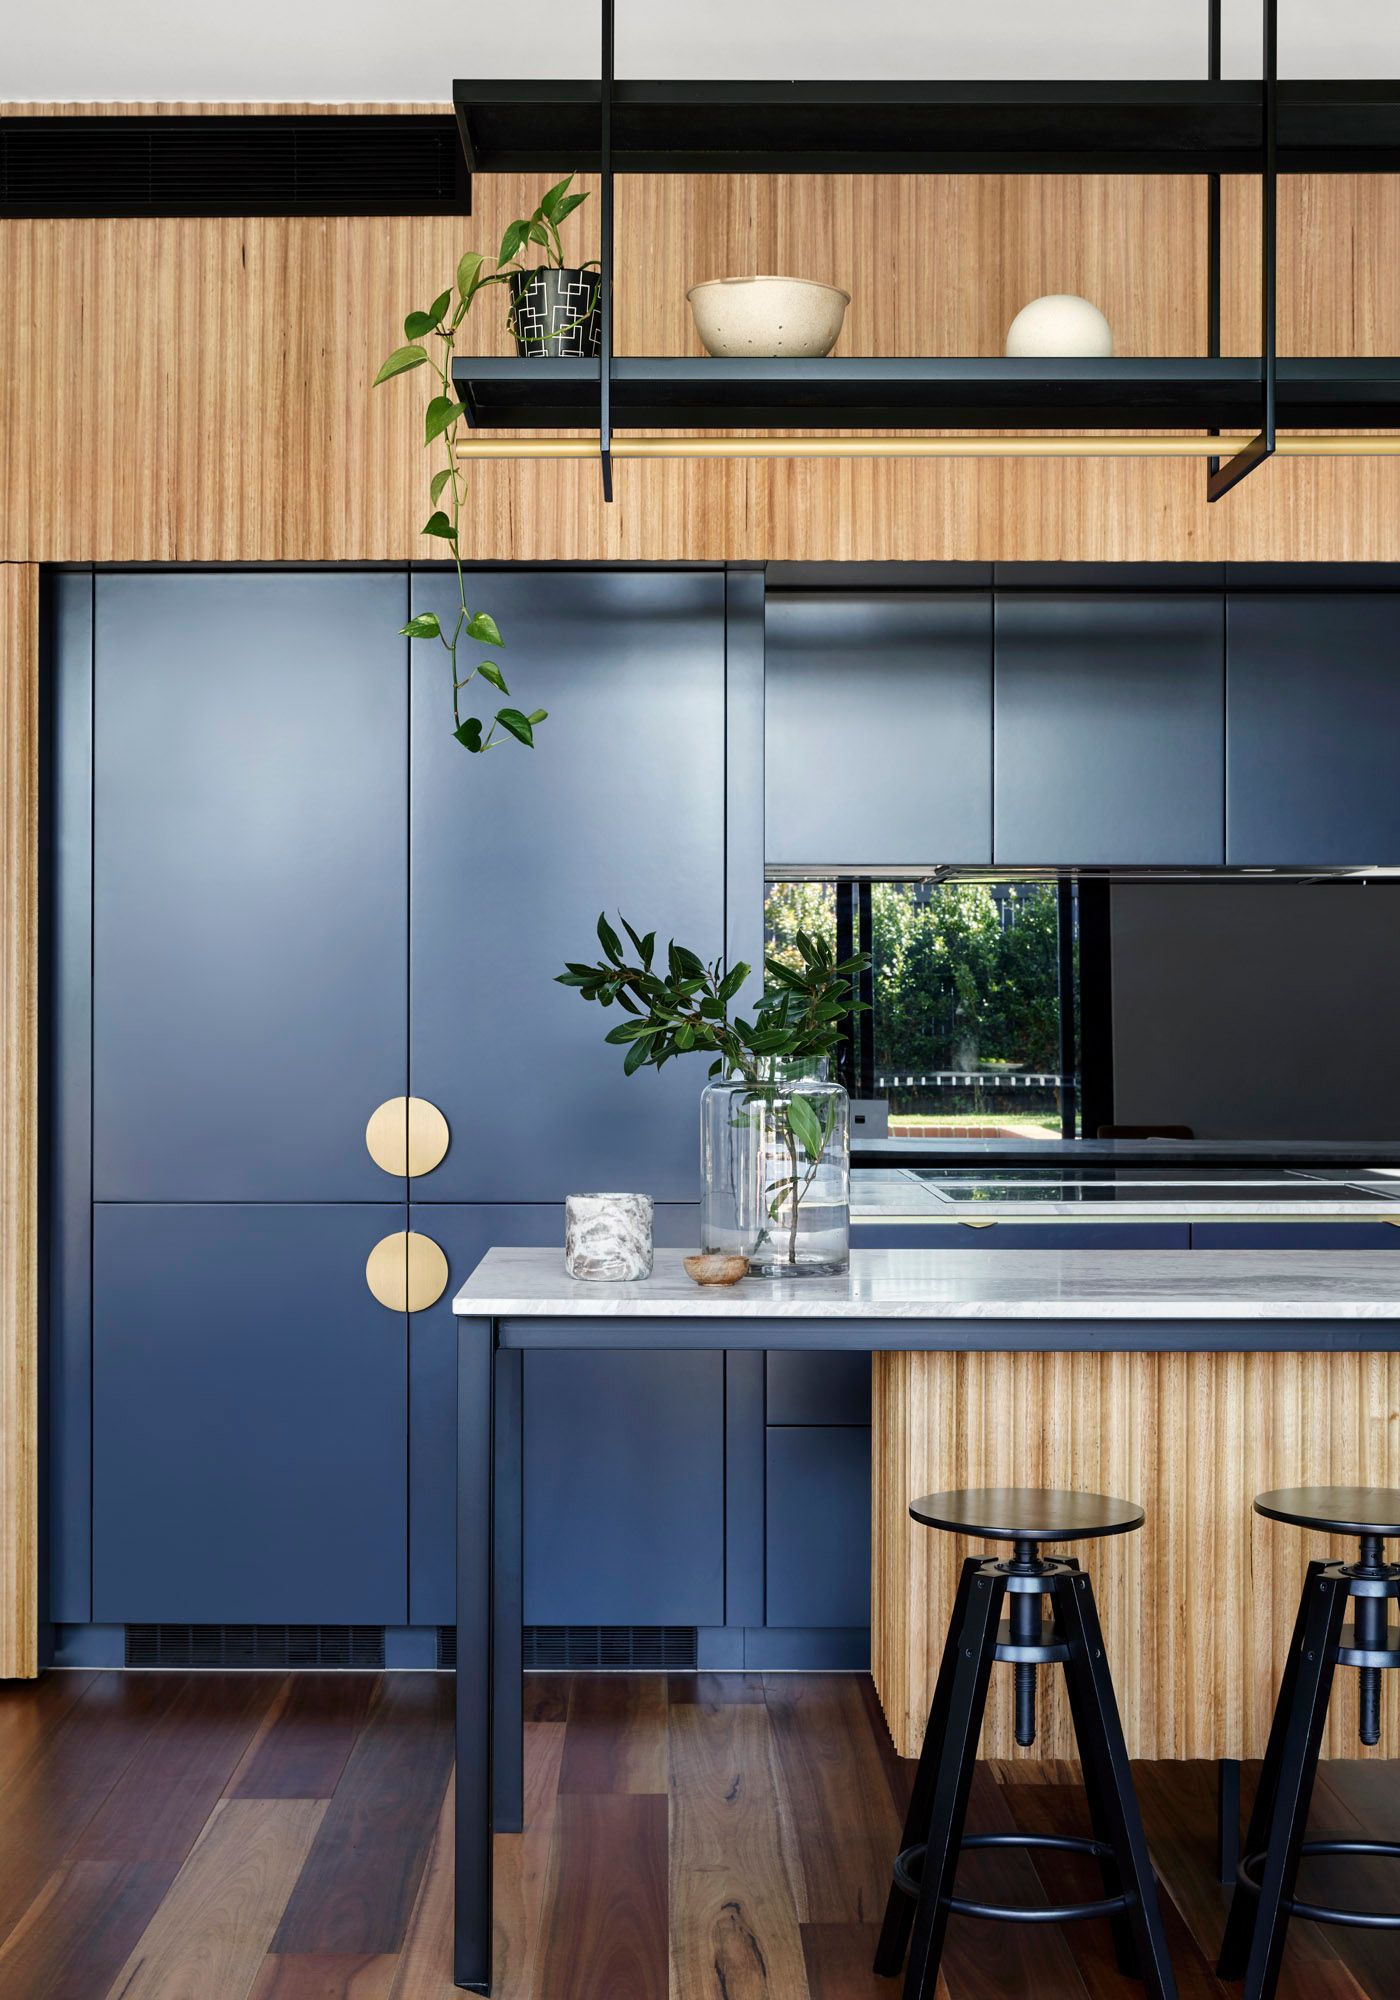 Slate House by Austin Maynard Architects. Detailed view of Kitchen Interior